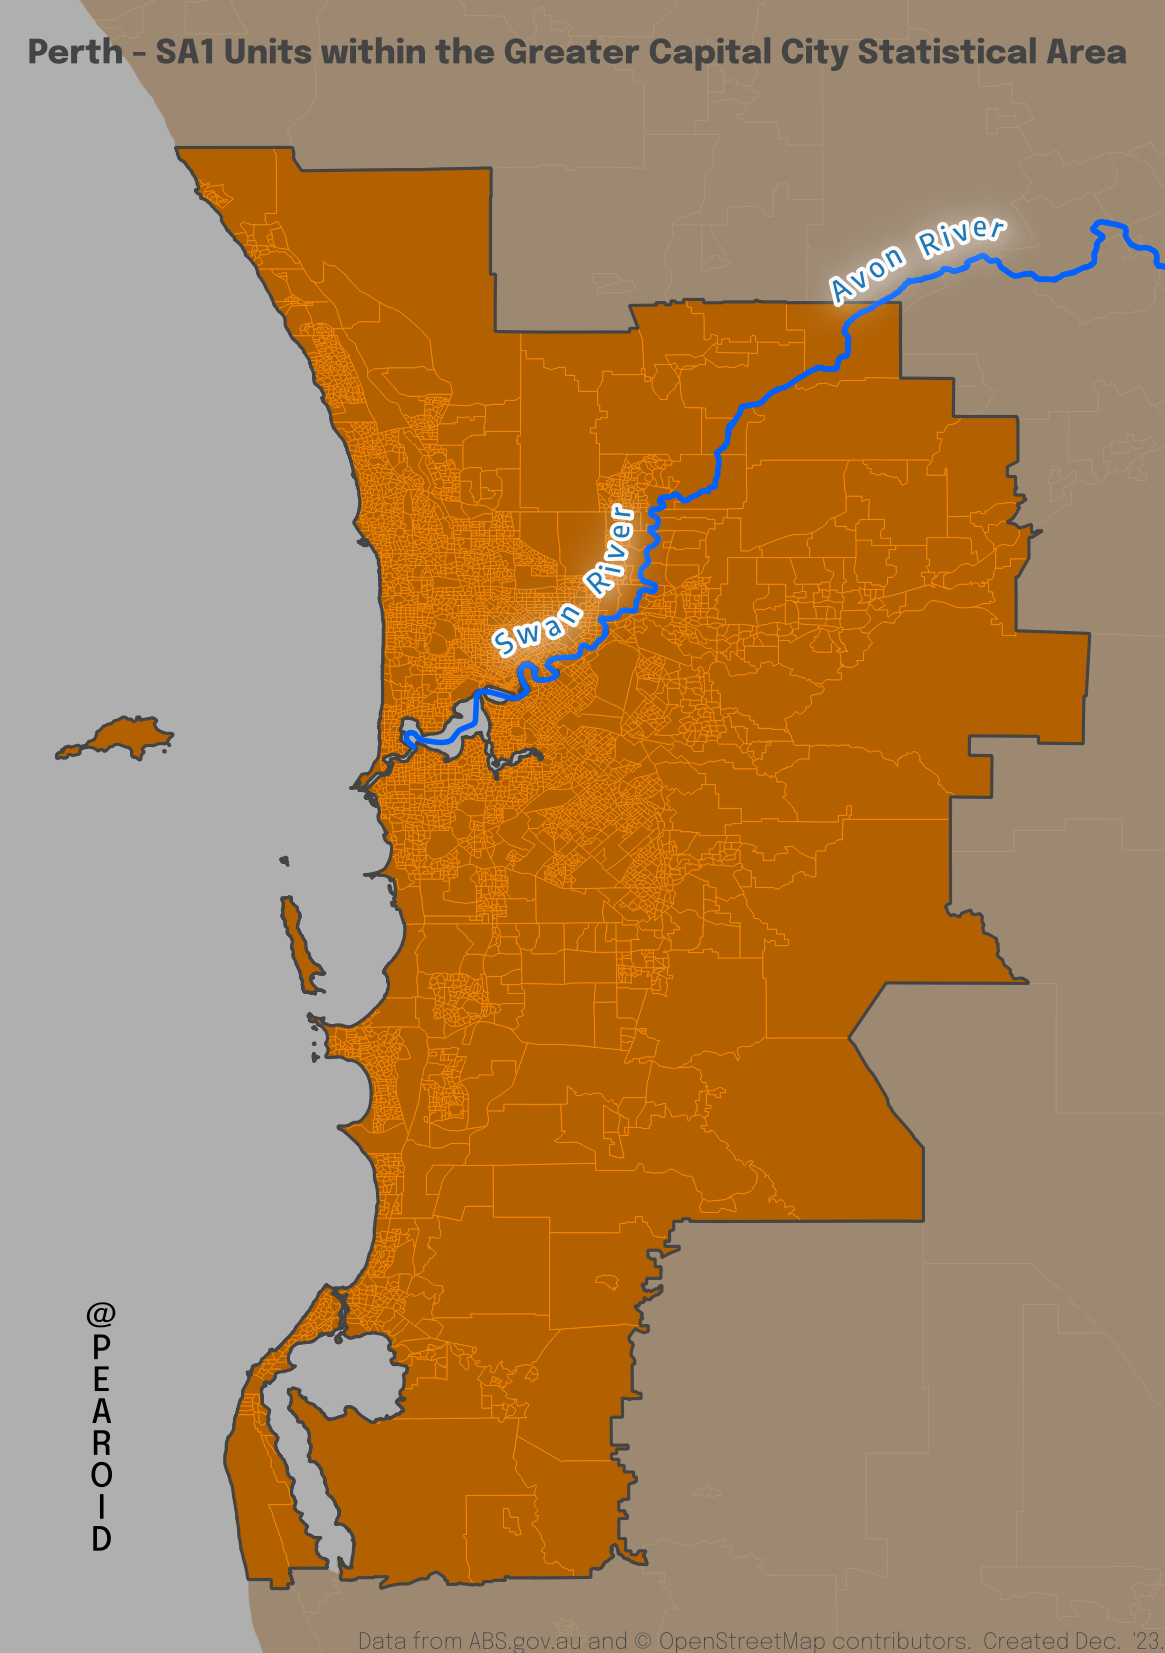 Perth - SA1 Units with the Greater Capital City Statistical Area